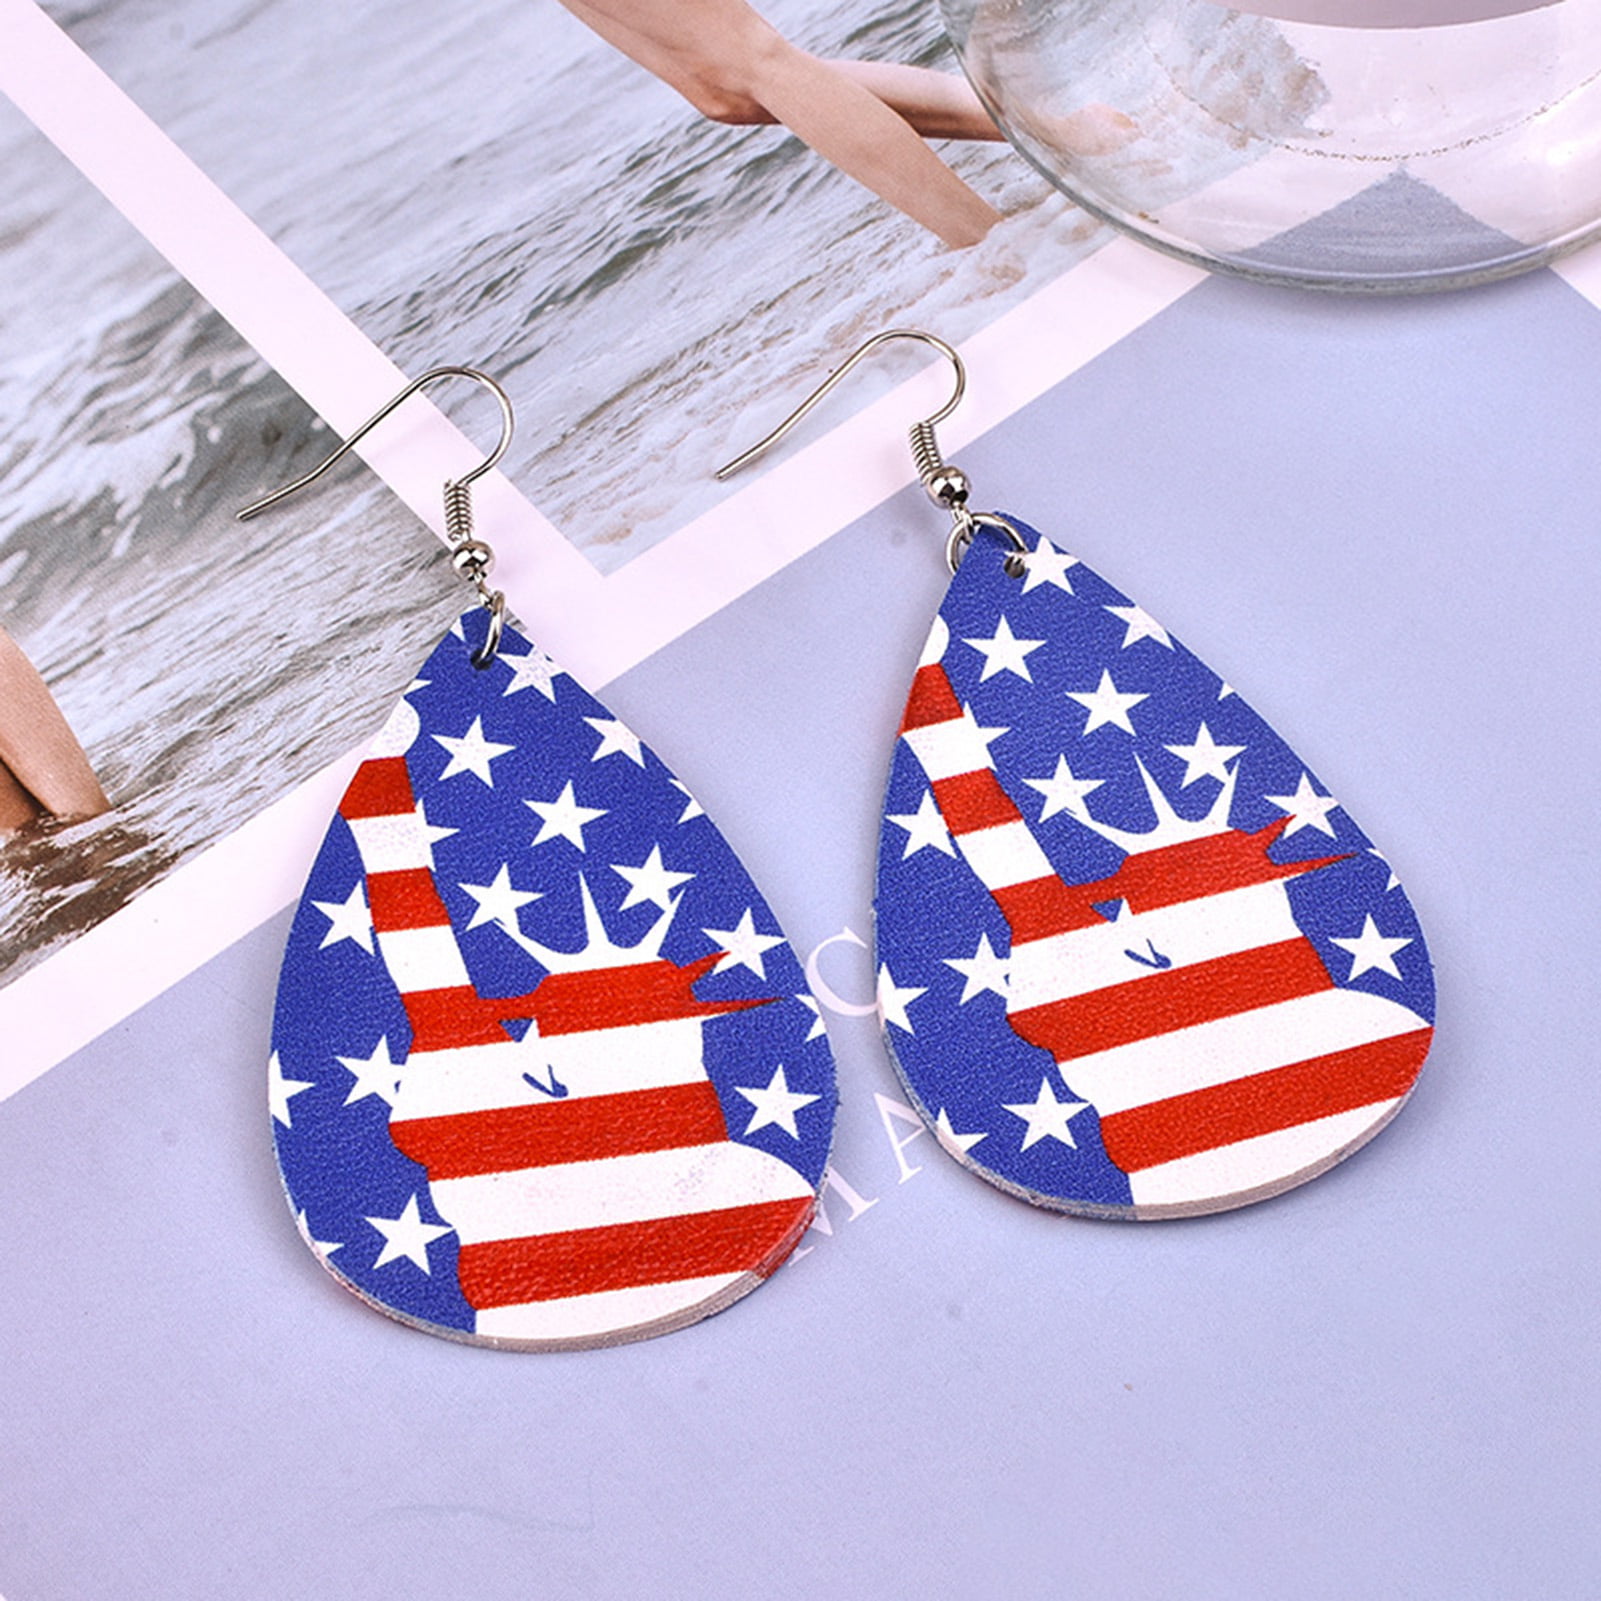 Striped Leaf Earrings Faux Leather Earrings Shiny Earrings Party Favors Great Gift Choose Your Color Colorful Cute Jewelry